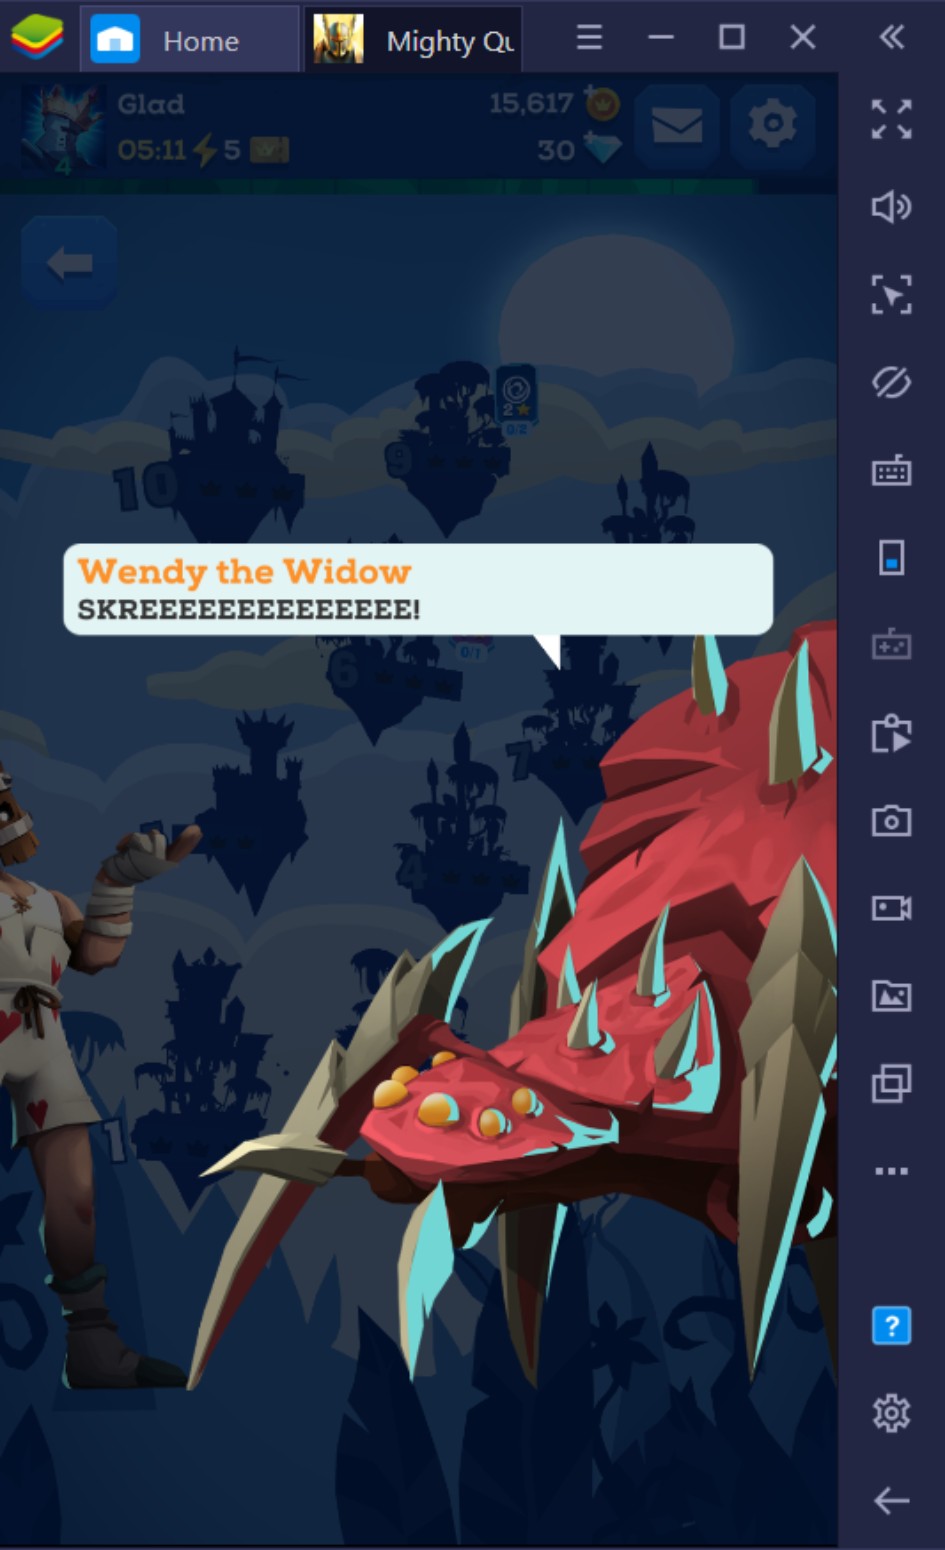 BlueStacks Review of Mighty Quest for Epic Loot on PC